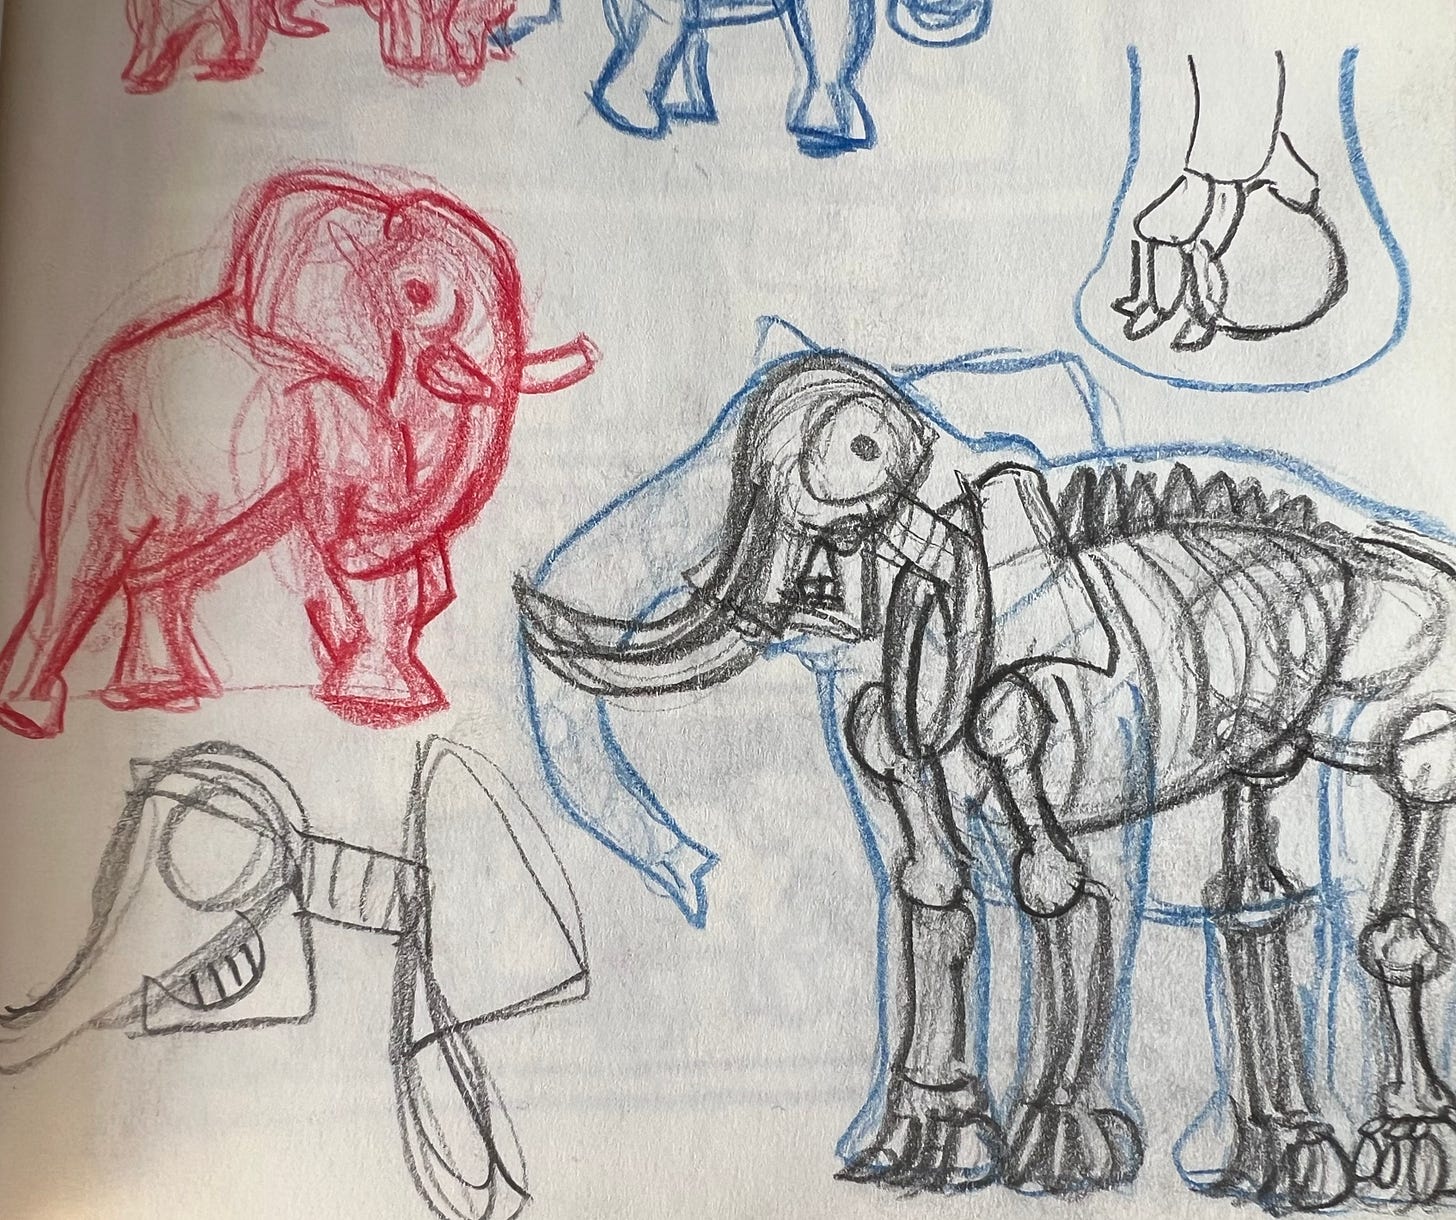 Some scribbly sketches of elephants, and a very basic elephant skeleton.